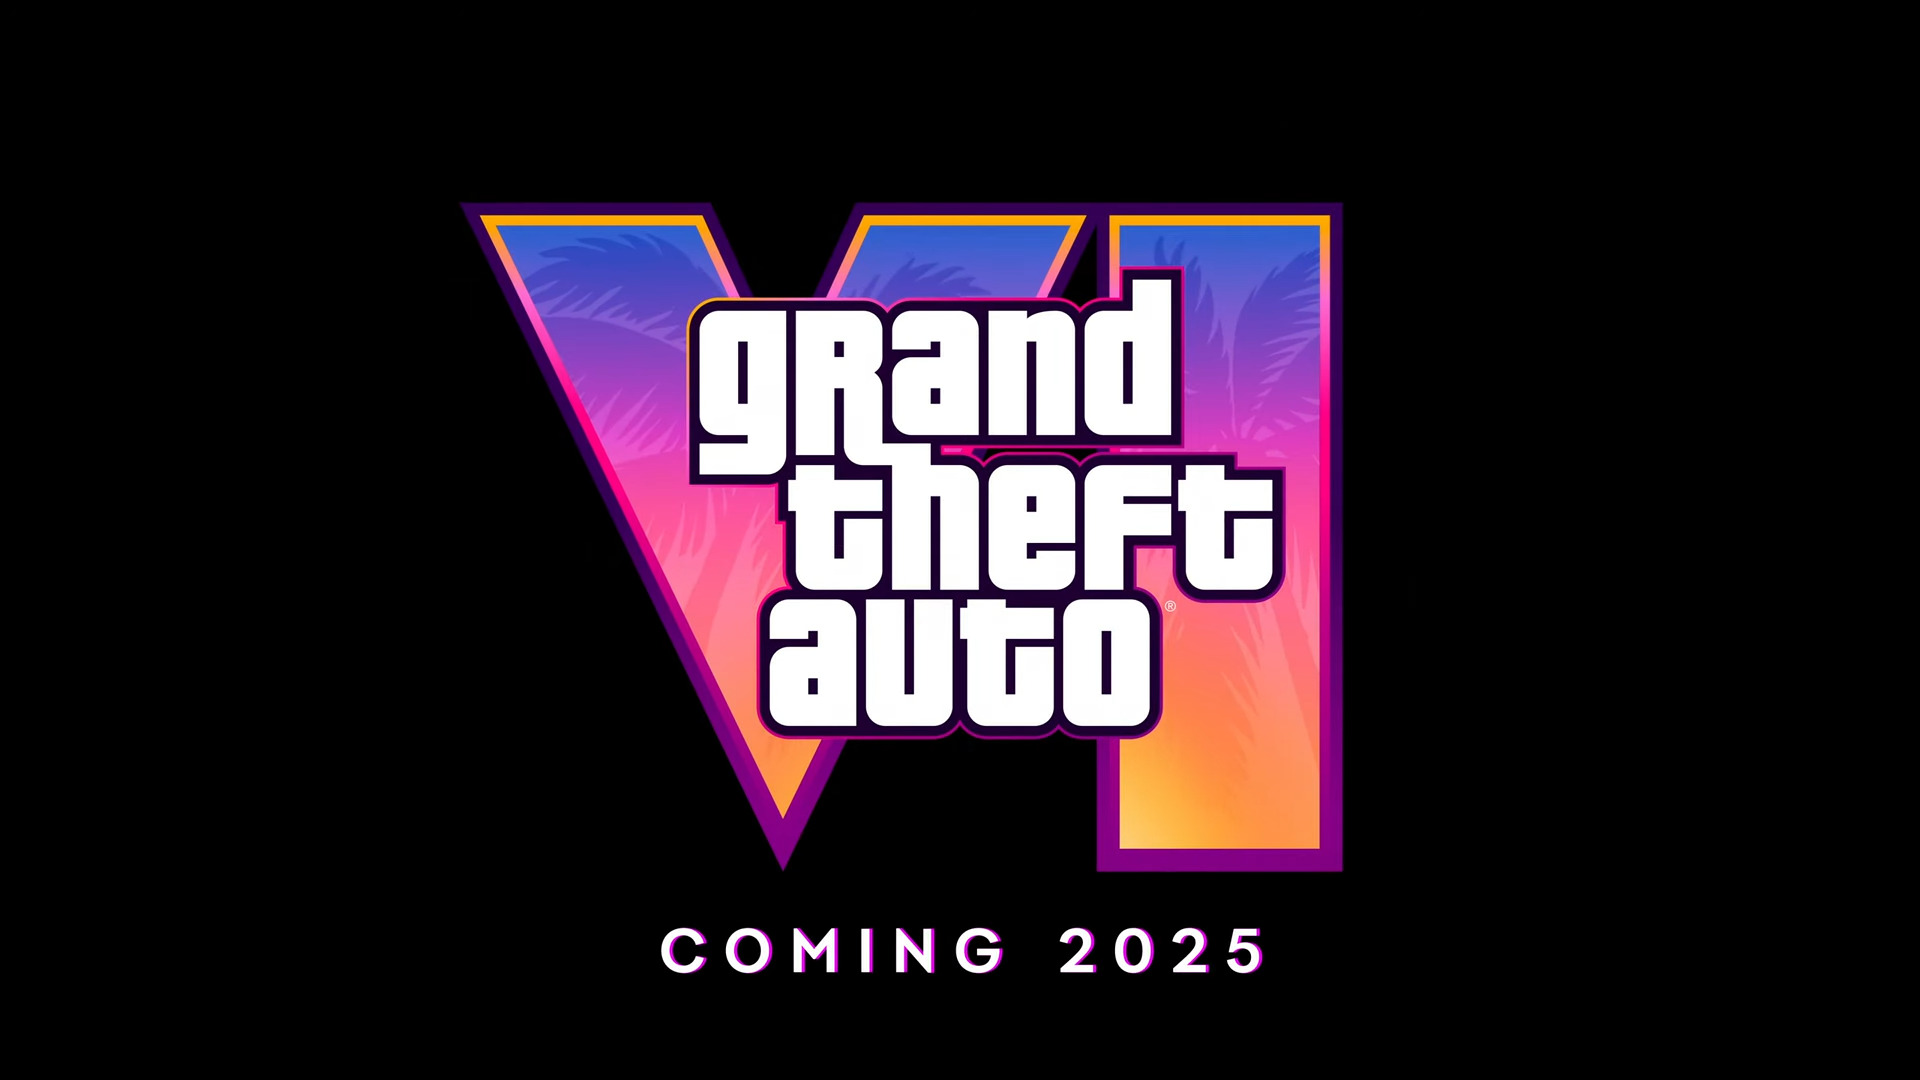 Grand Theft Auto 6 Trailer Showcases New Protagonists and Vice City, Out in 2025